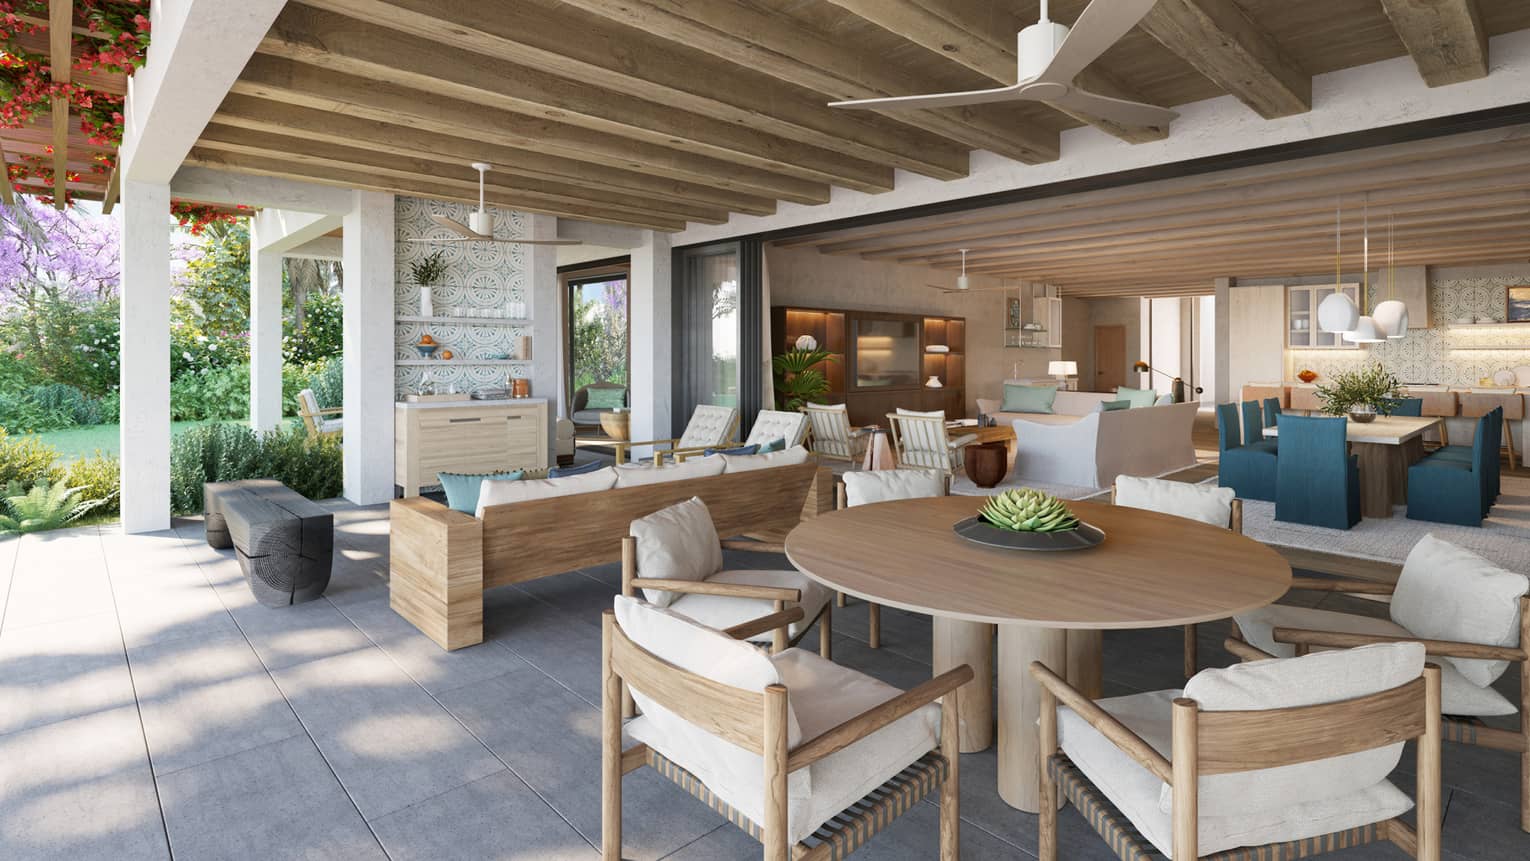 Indoor-outdoor dining and seating area with wooden furniture and accents